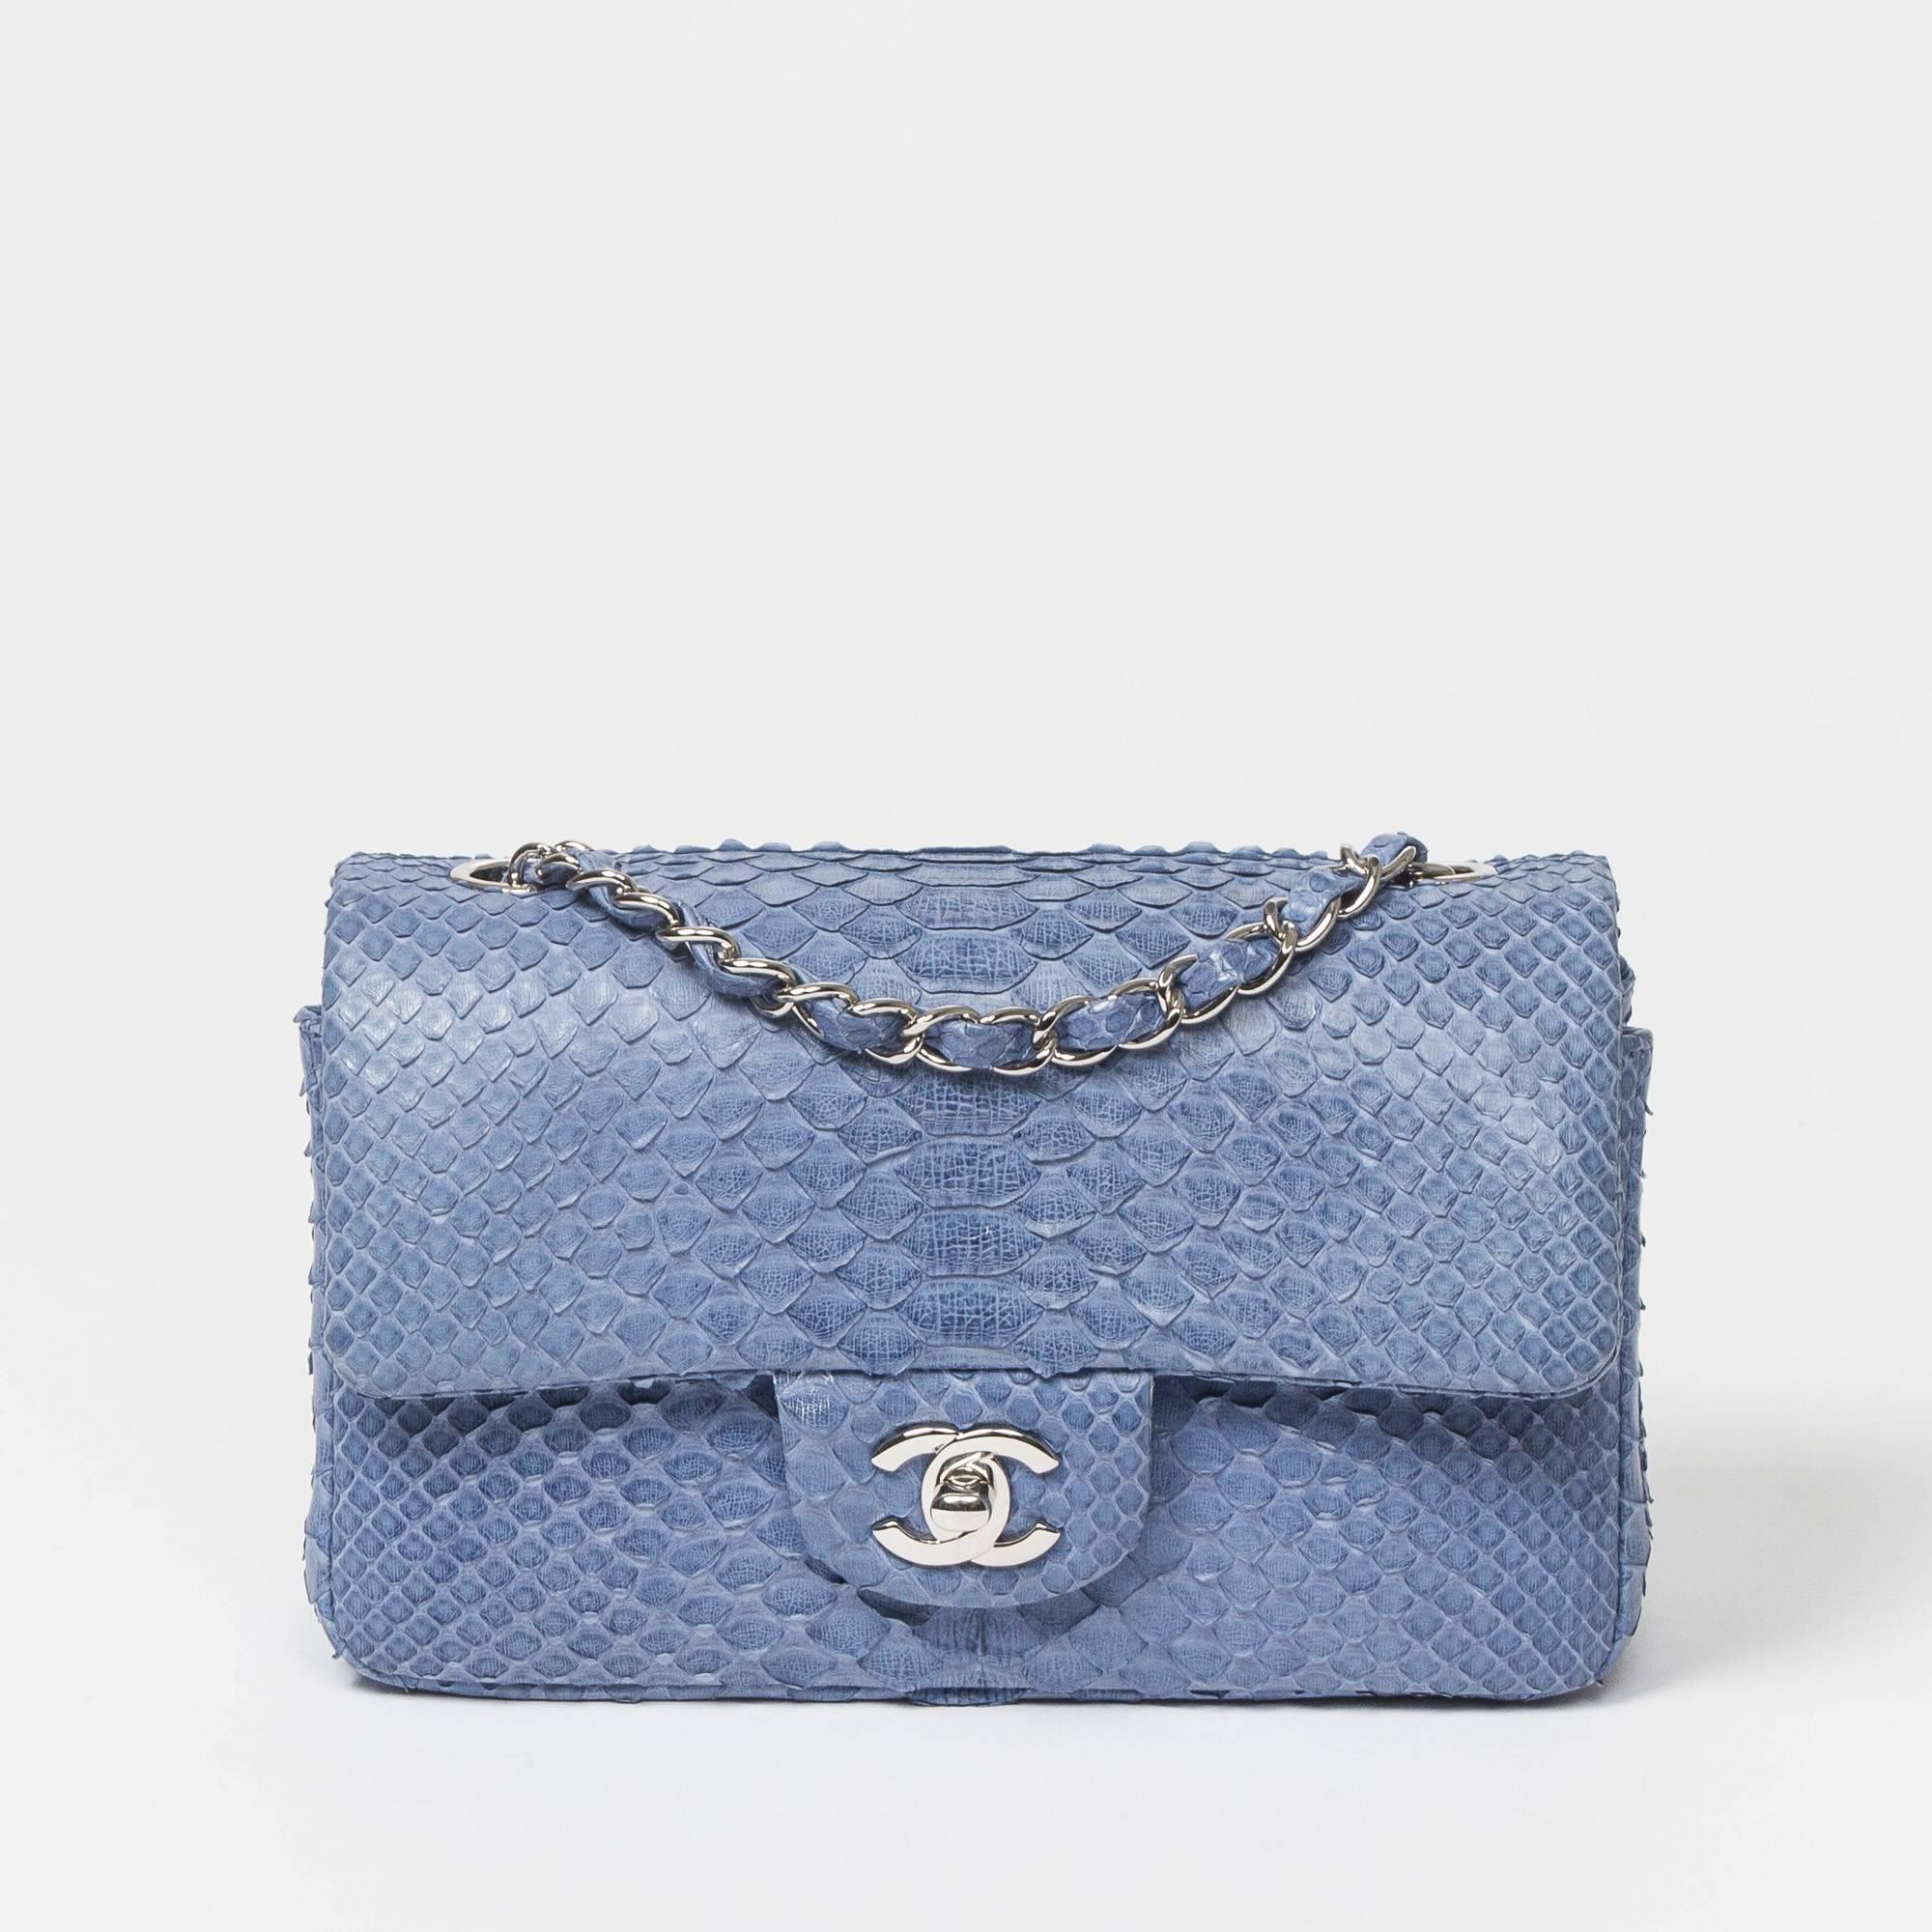 Mini Flap in powder blue python skin, silver chain strap interlaced with python and CC turnlock. Back slip pocket. Denim blue leather lined interior with one slip pocket and one zip pocket. Engraved metal plaque 